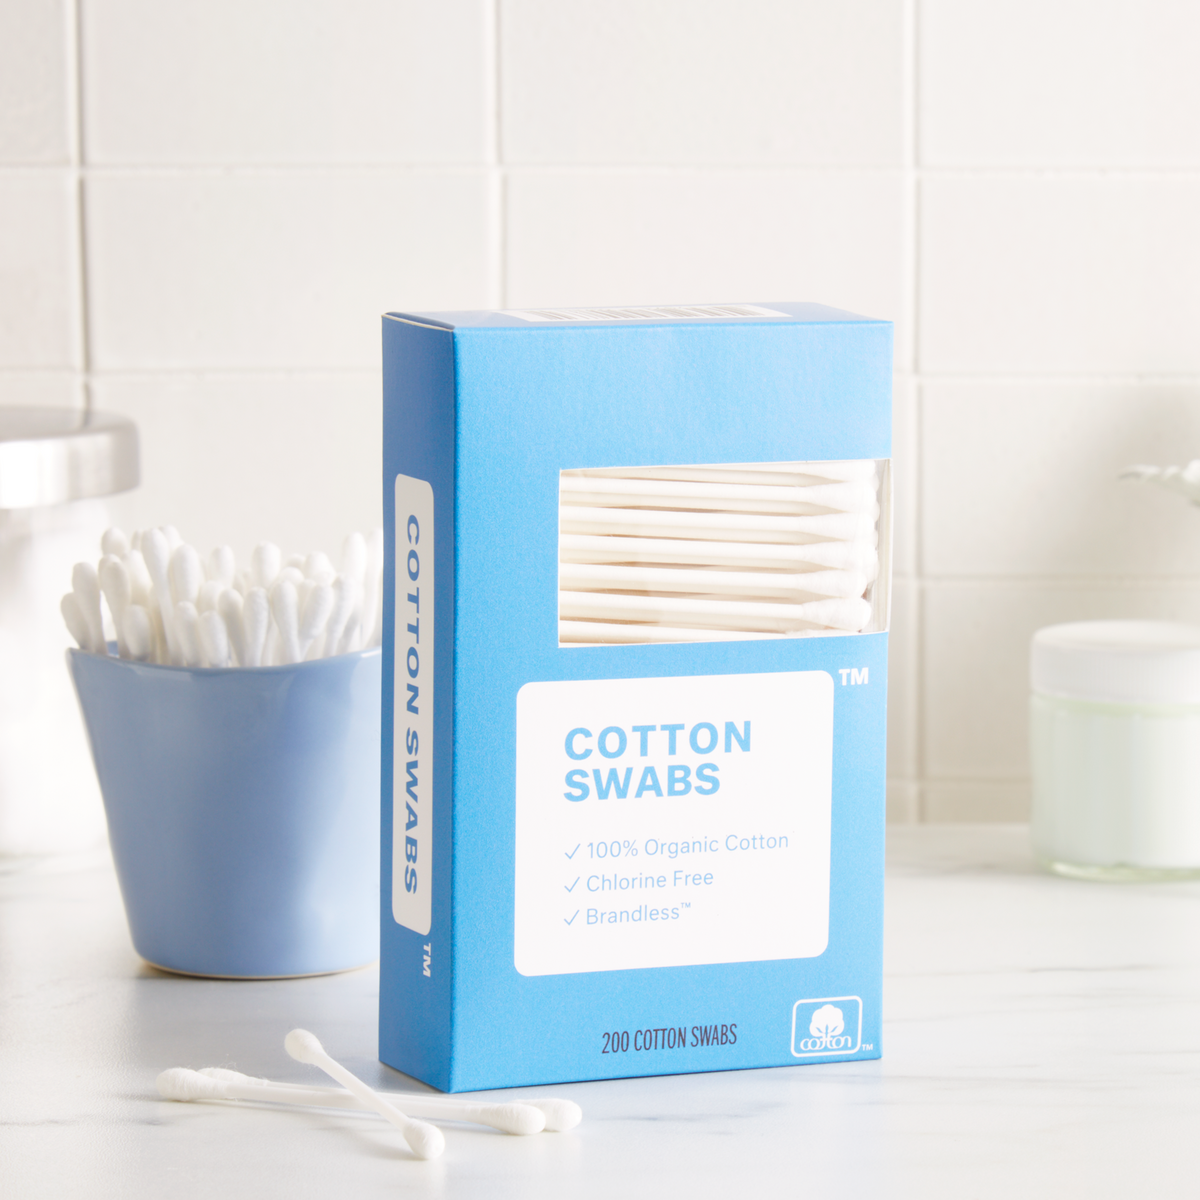 Lifestyle photo. Box of cotton swabs sits on counter next to a small ceramic cup full of swabs on a bathroom counter.Cotton Swabs. 100% organic cotton. double tipped. chlorine bleach free. hypoallergenic. Brandless.